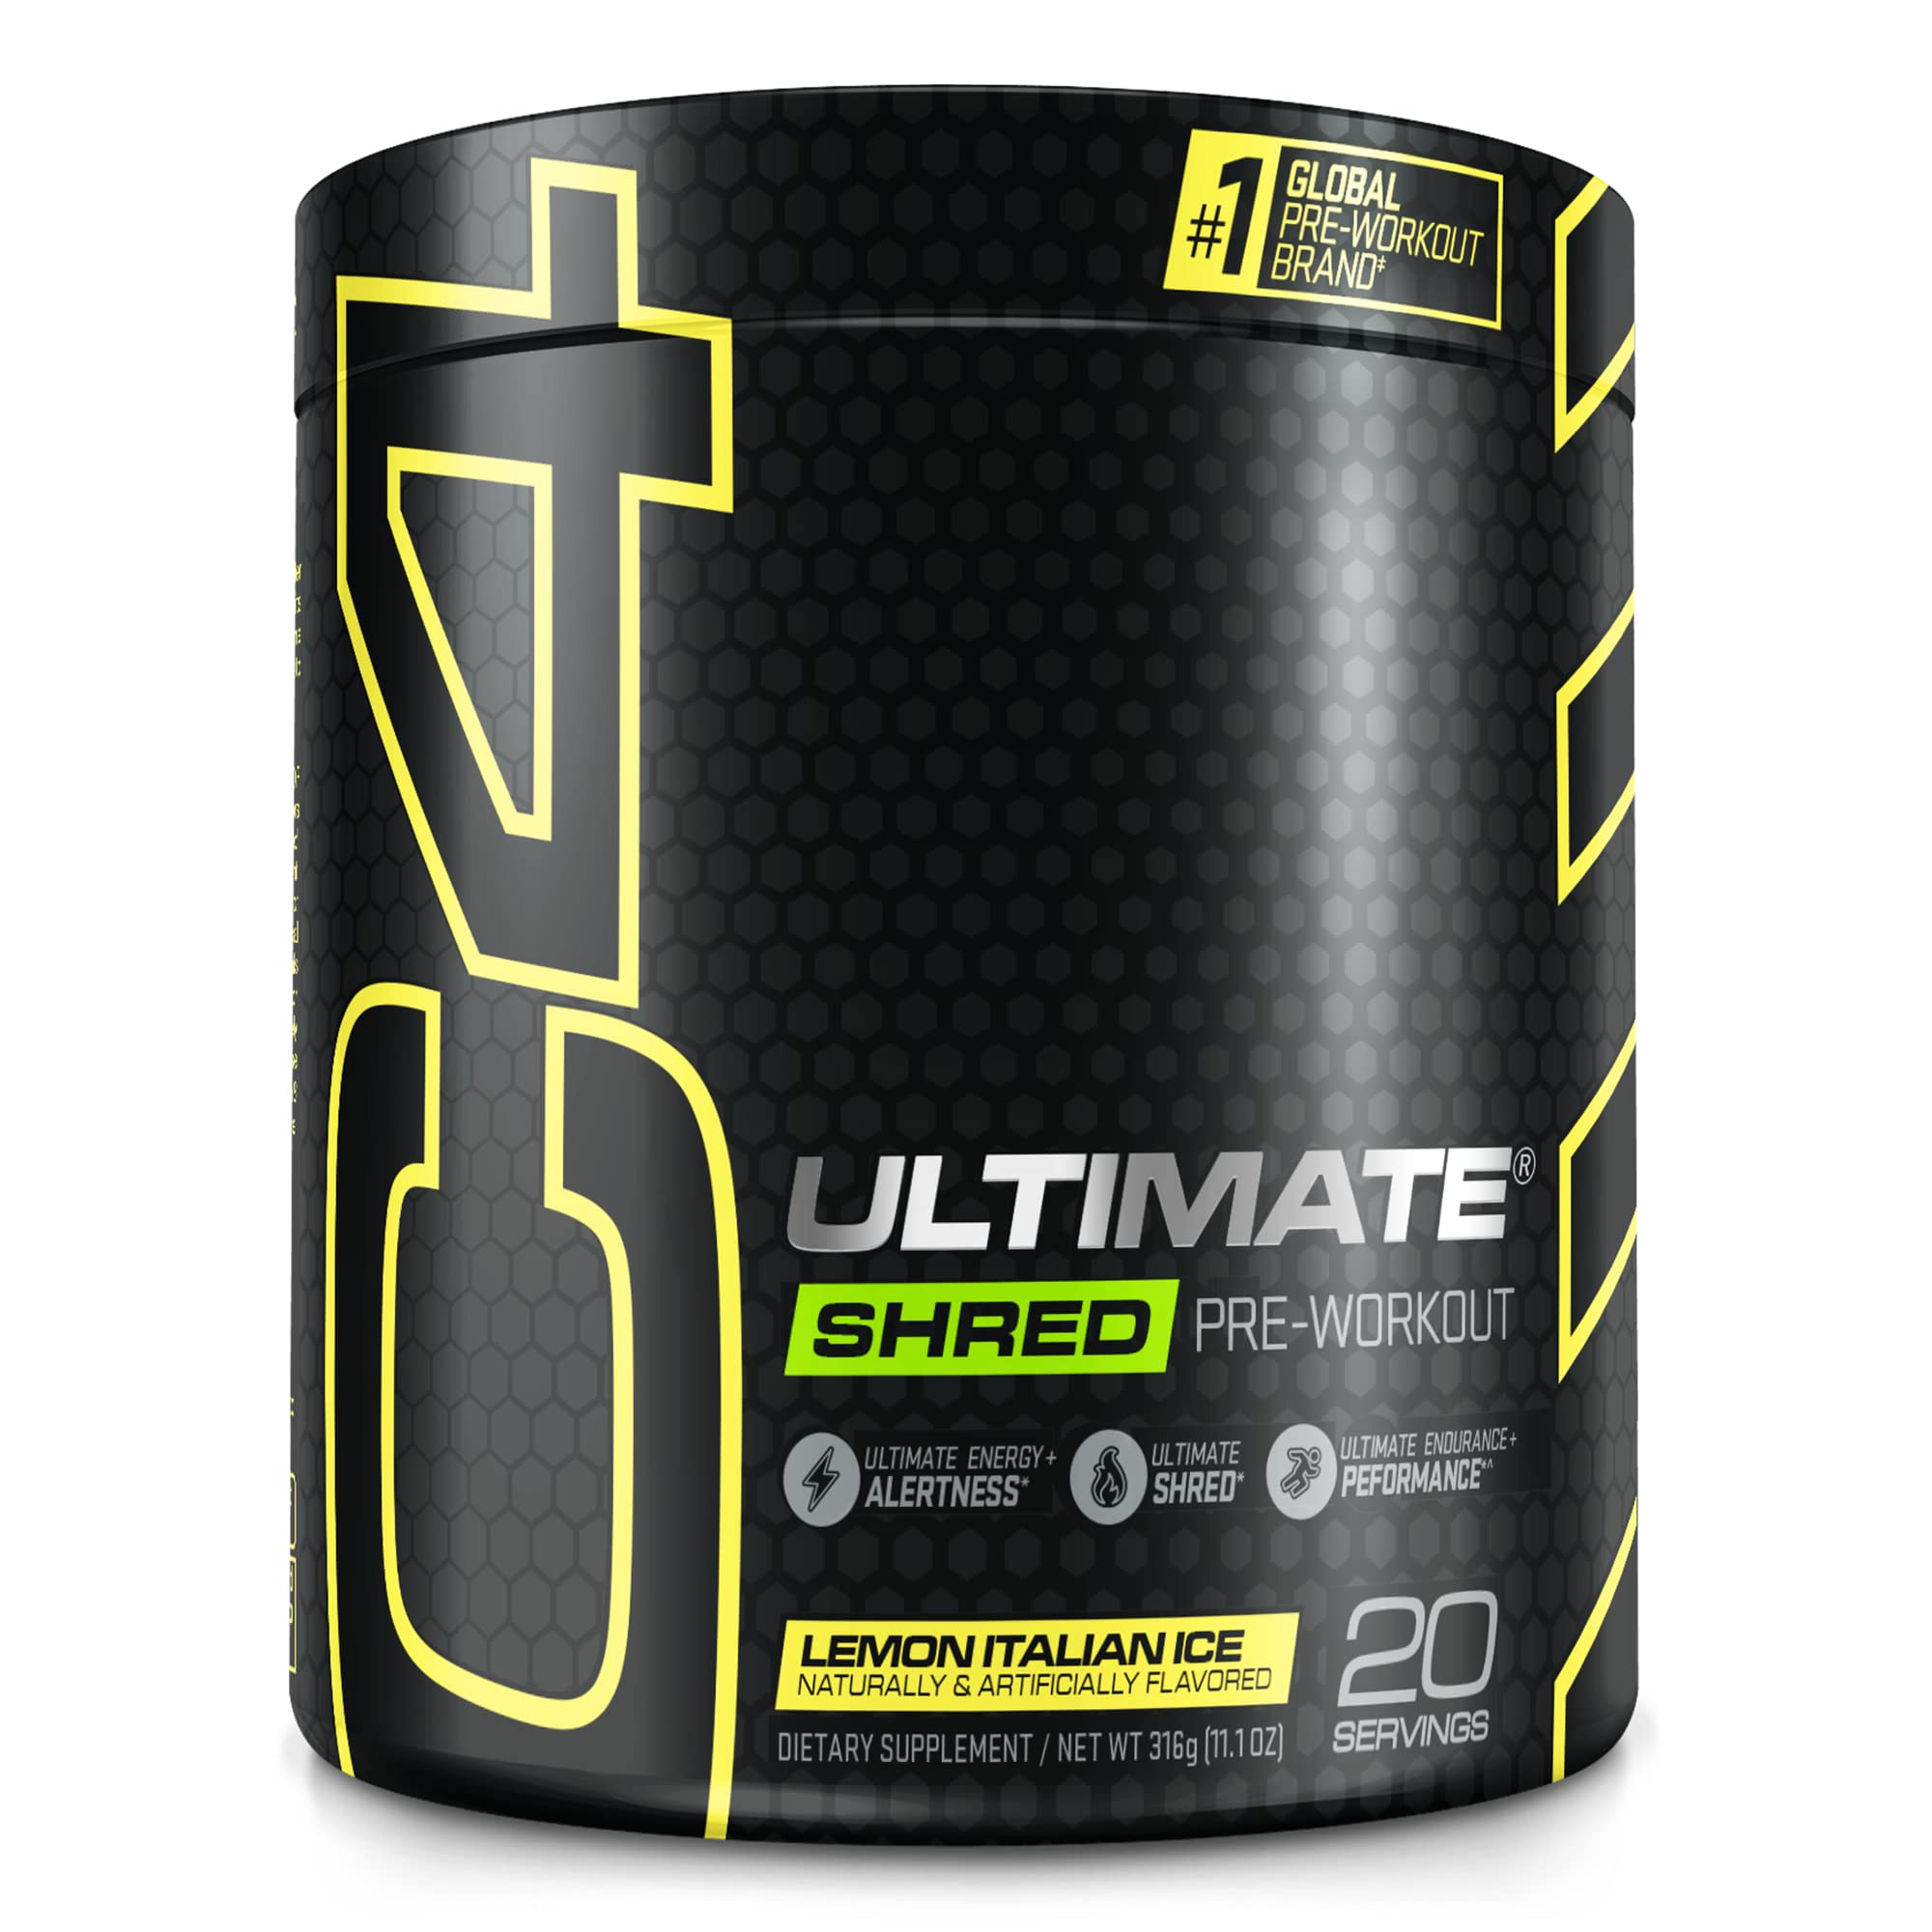 Book Cover Cellucor C4 Ultimate Shred Pre Workout Powder, Fat Burner for Men & Women, Metabolism Supplement with Ginger Root Extract, Lemon Italian Ice, 20 Servings Lemon Italian Ice 20.0 Servings (Pack of 1)